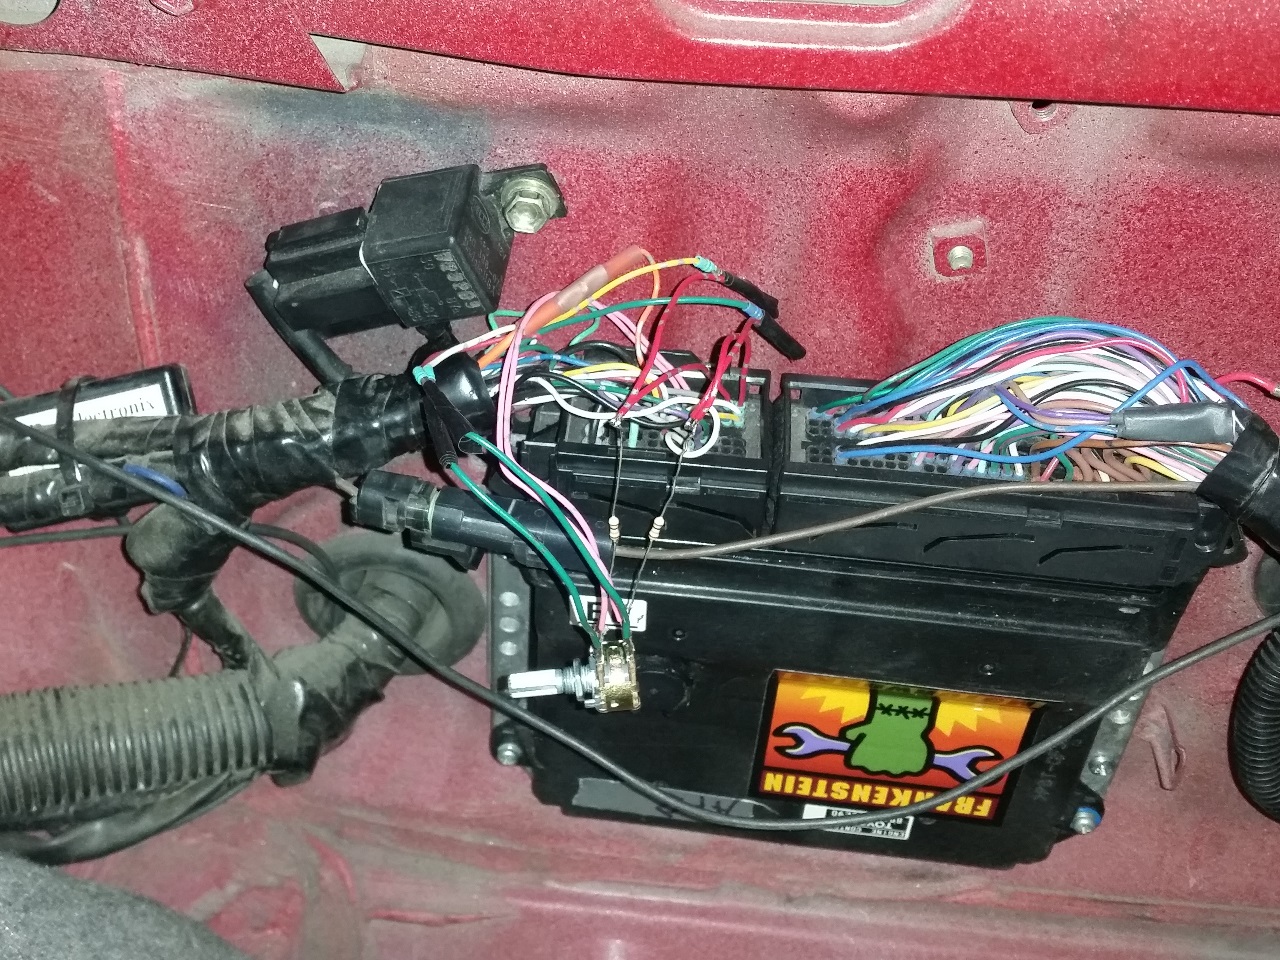 Throttle controller wired for testing